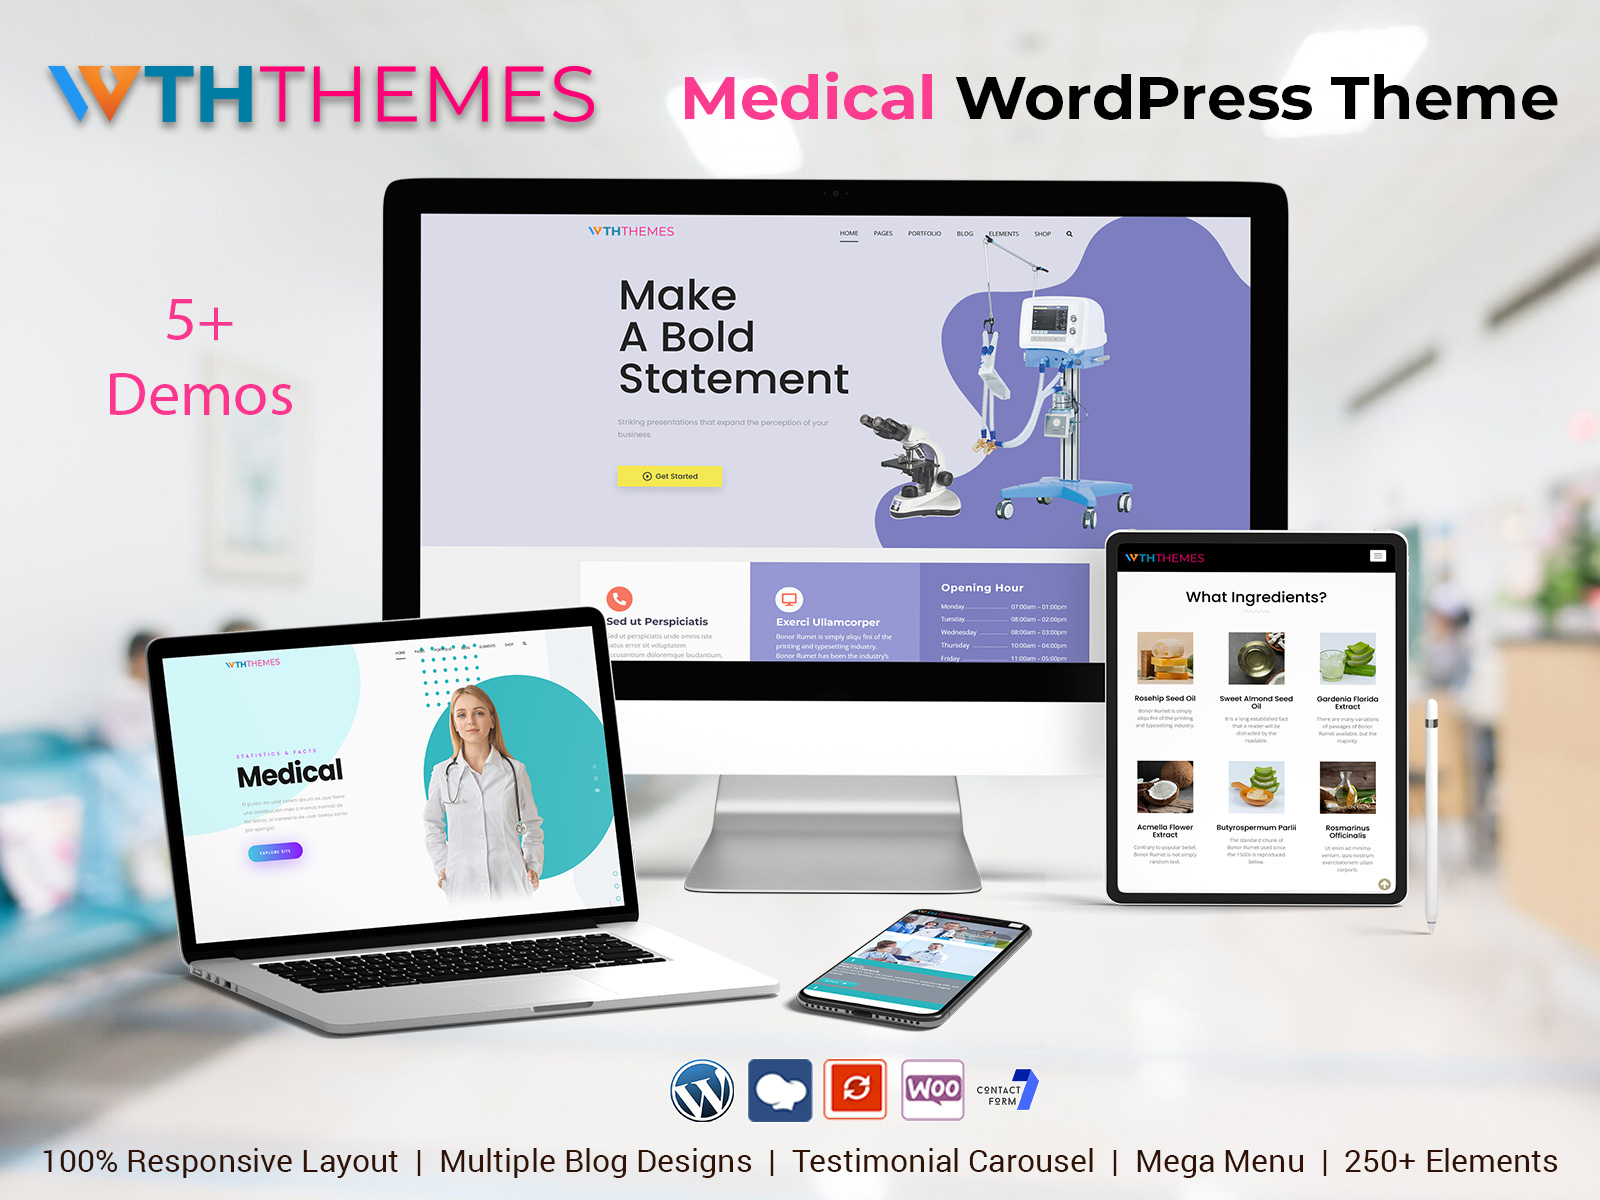 Transform Your Healthcare Website With A Medical WordPress Theme